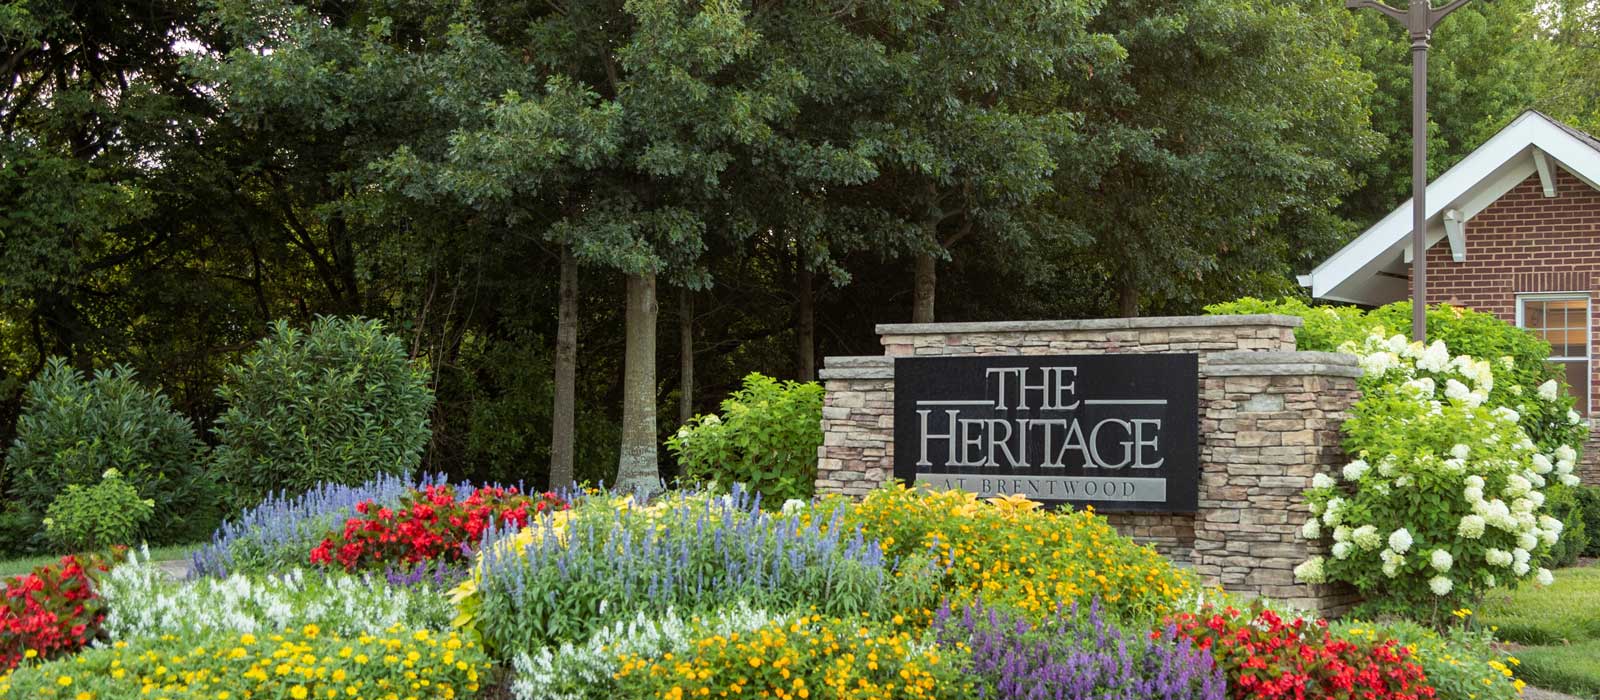 The Heritage front sign